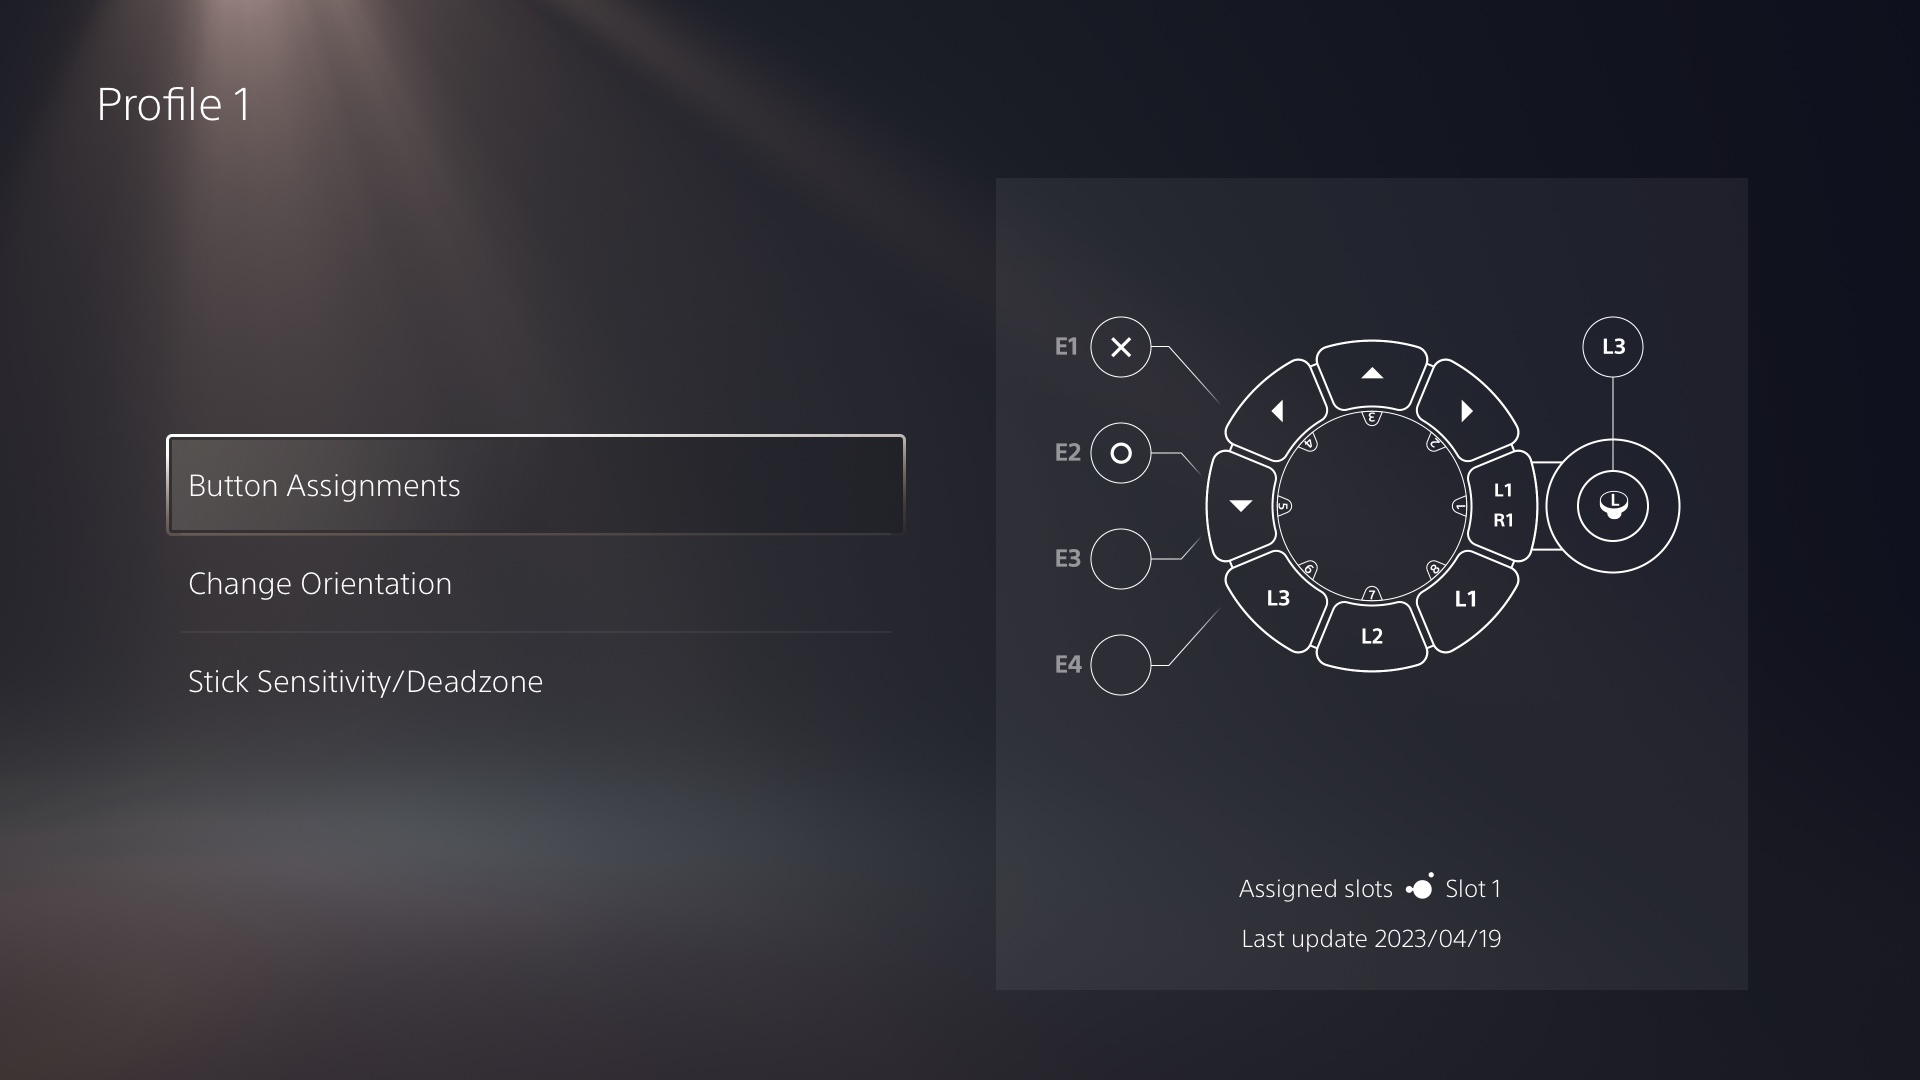  "Image of the access controller user interface showing button mapping options"